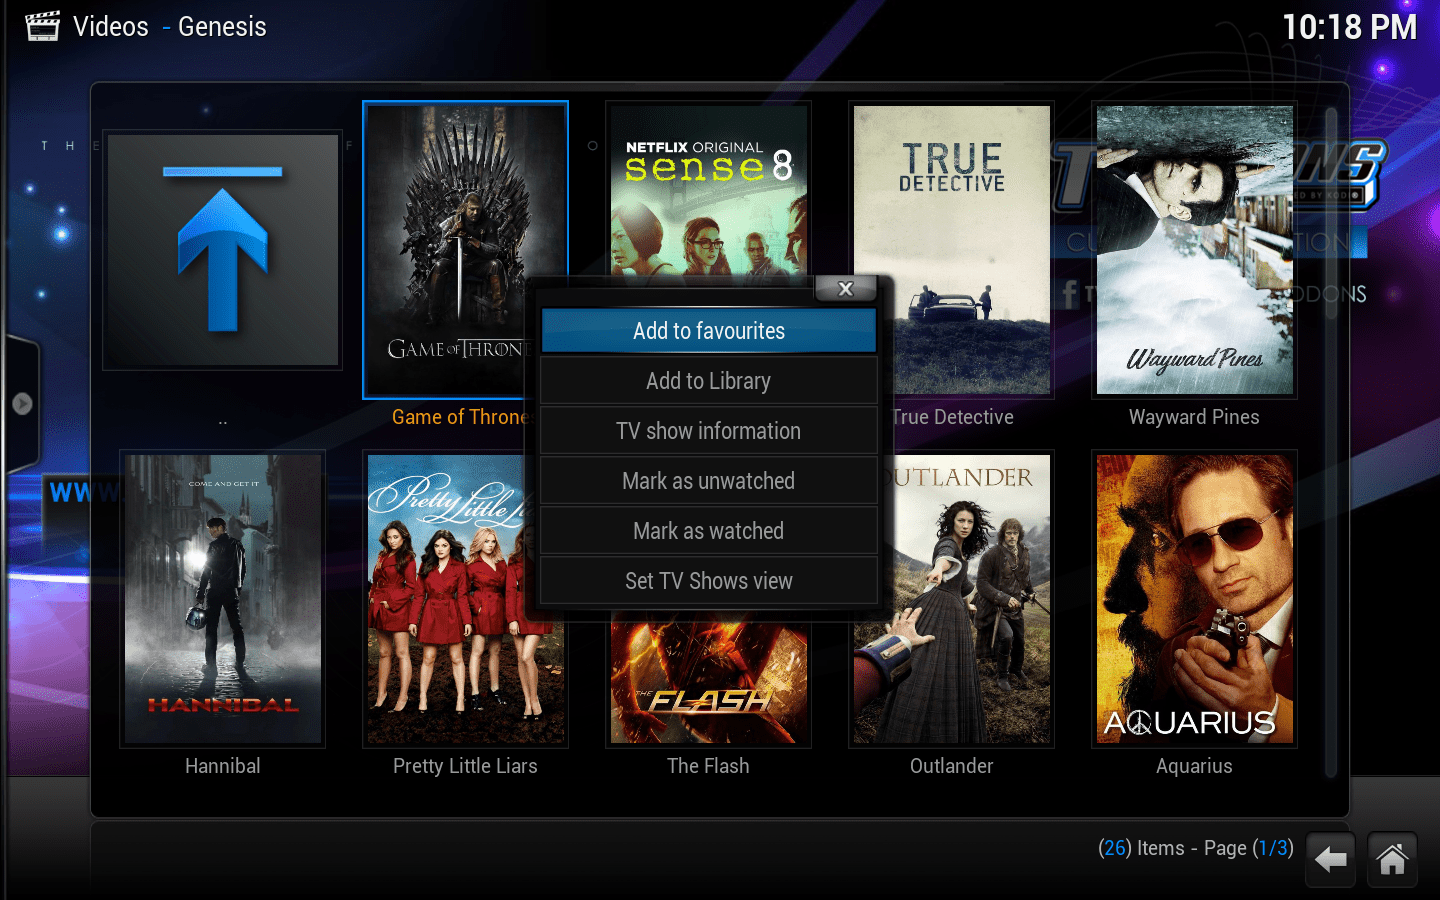 How to save favorites in Cinema Box app